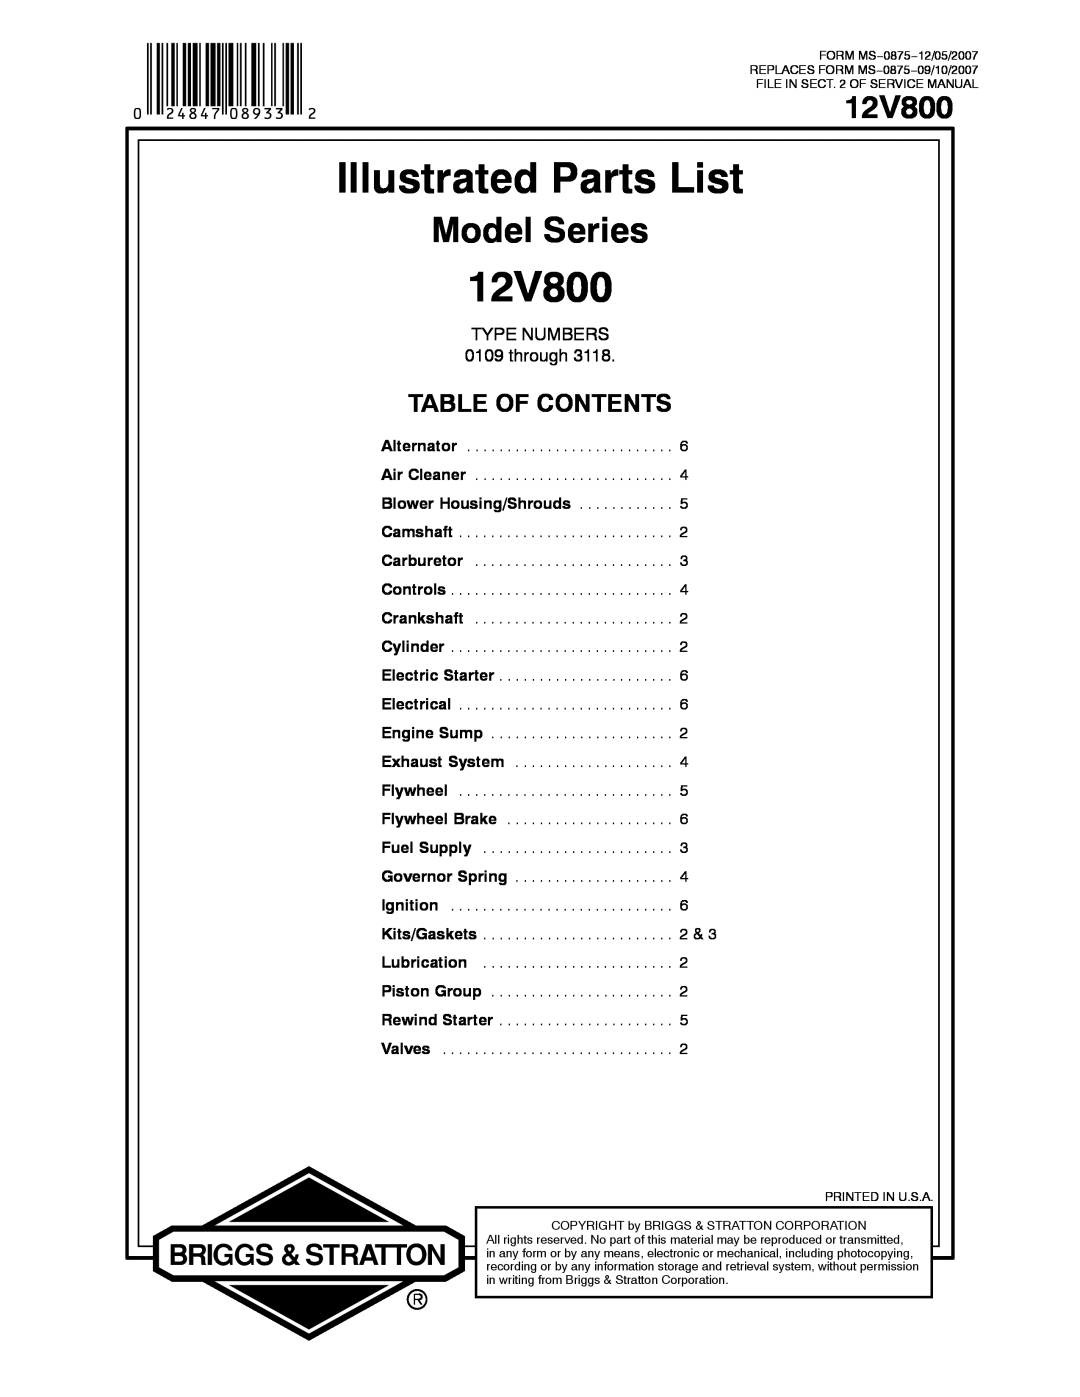 Briggs & Stratton 12V800 service manual Illustrated Parts List, Model Series, Table Of Contents, TYPE NUMBERS 0109 through 